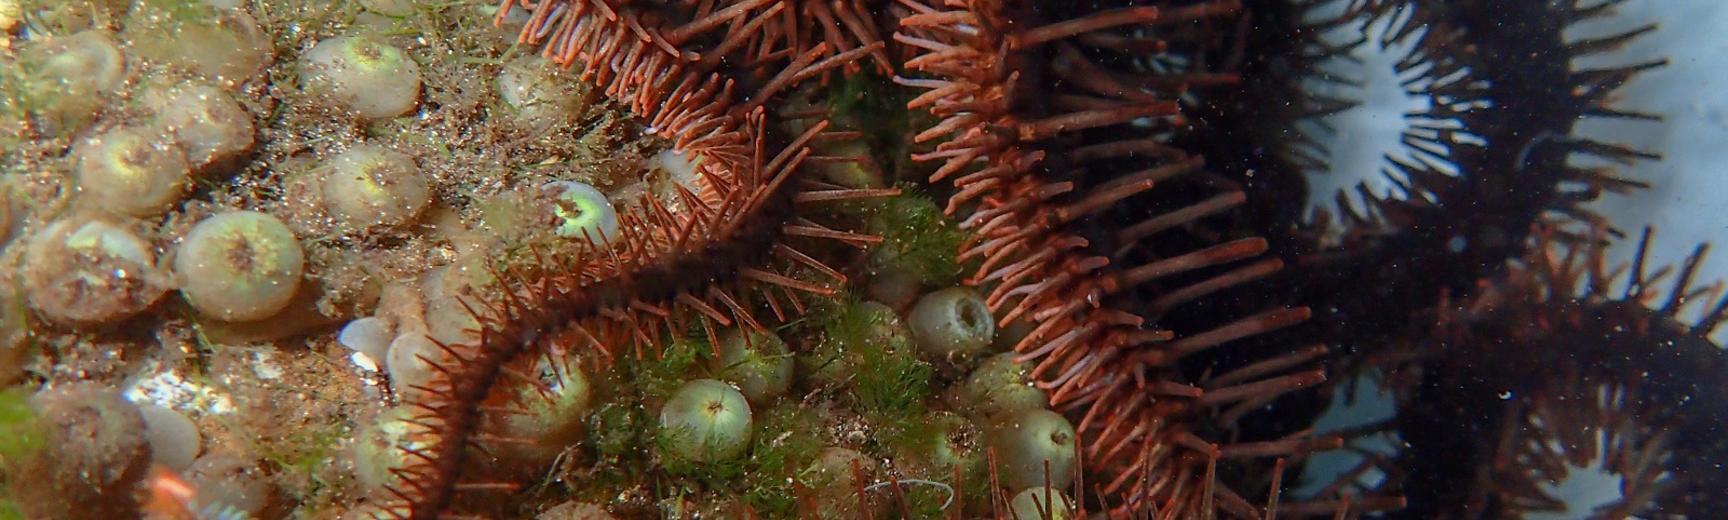 Starry eyes on the reef: colour-changing brittle stars can see